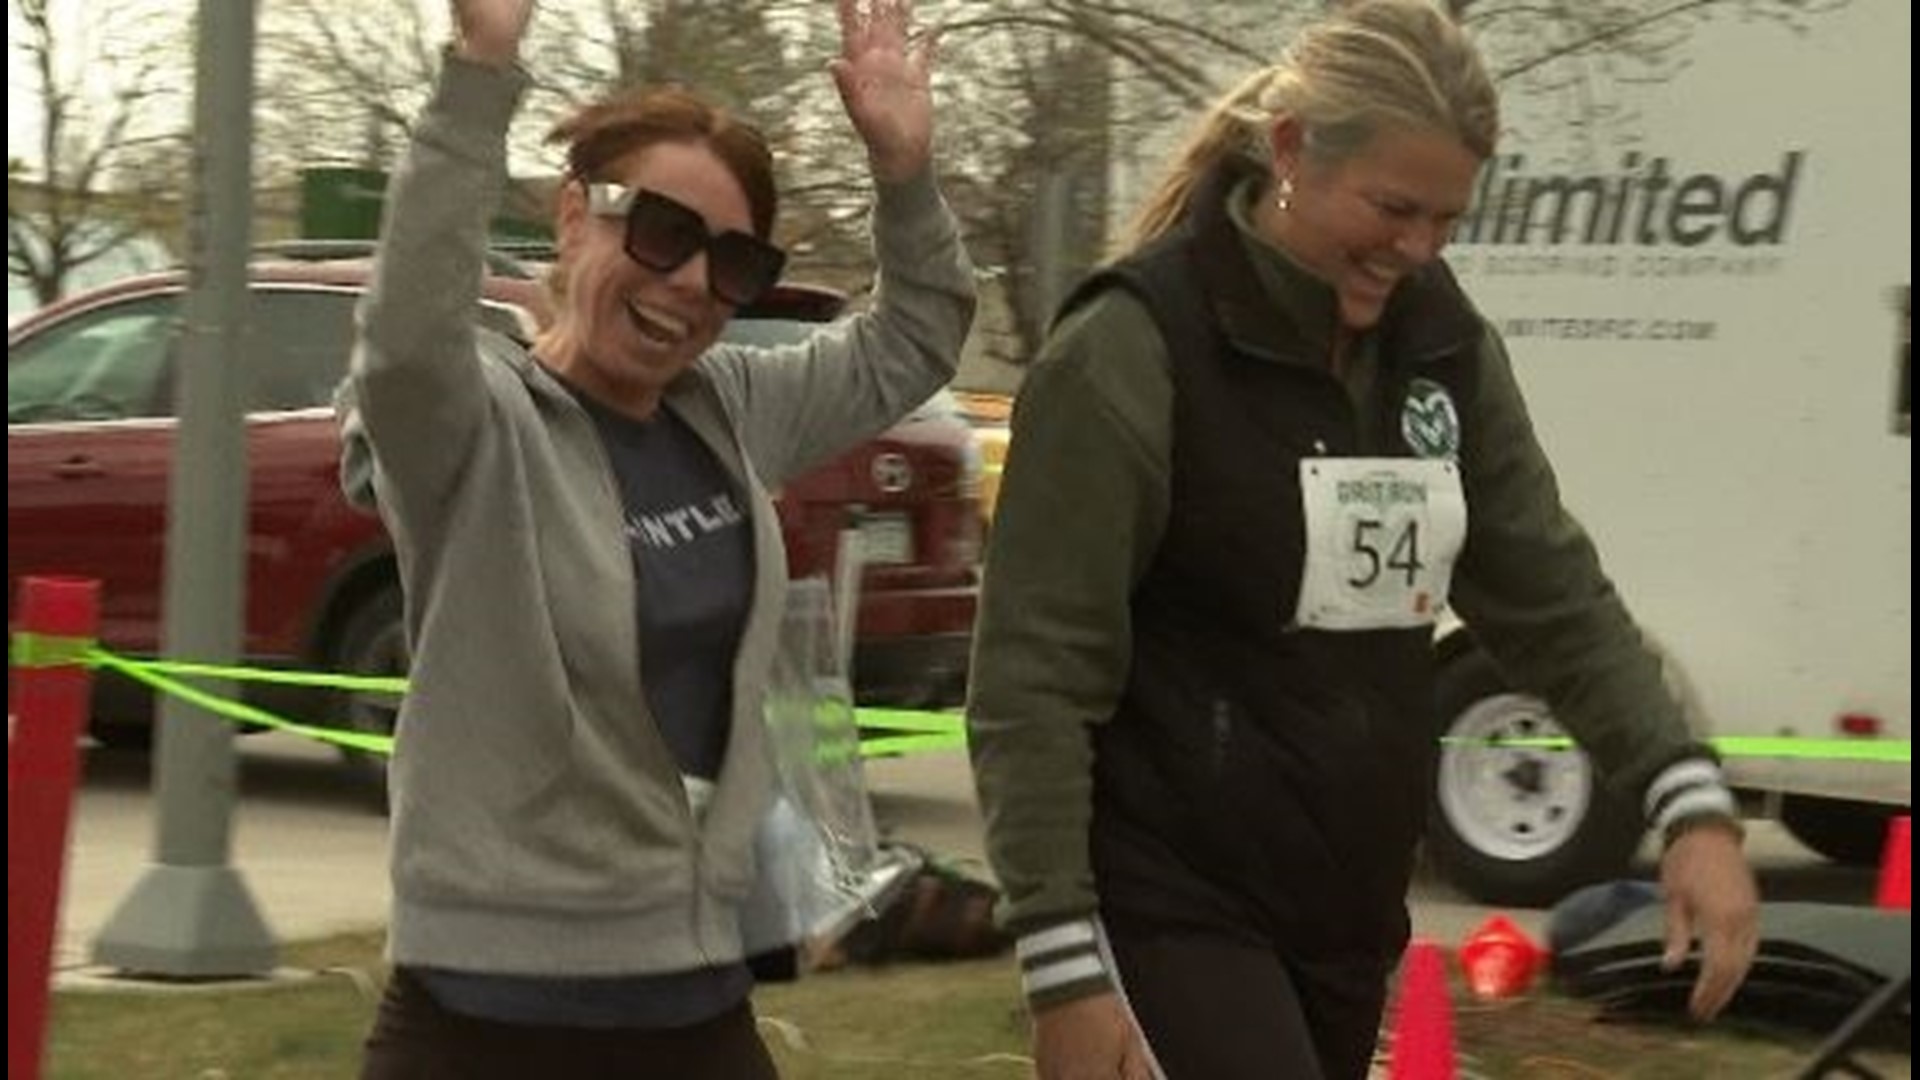 Kim and Jay Norvell hold annual Grit Run 5K to benefit cystic fibrosis research. The first Colorado State edition brought out more than 300 participants.